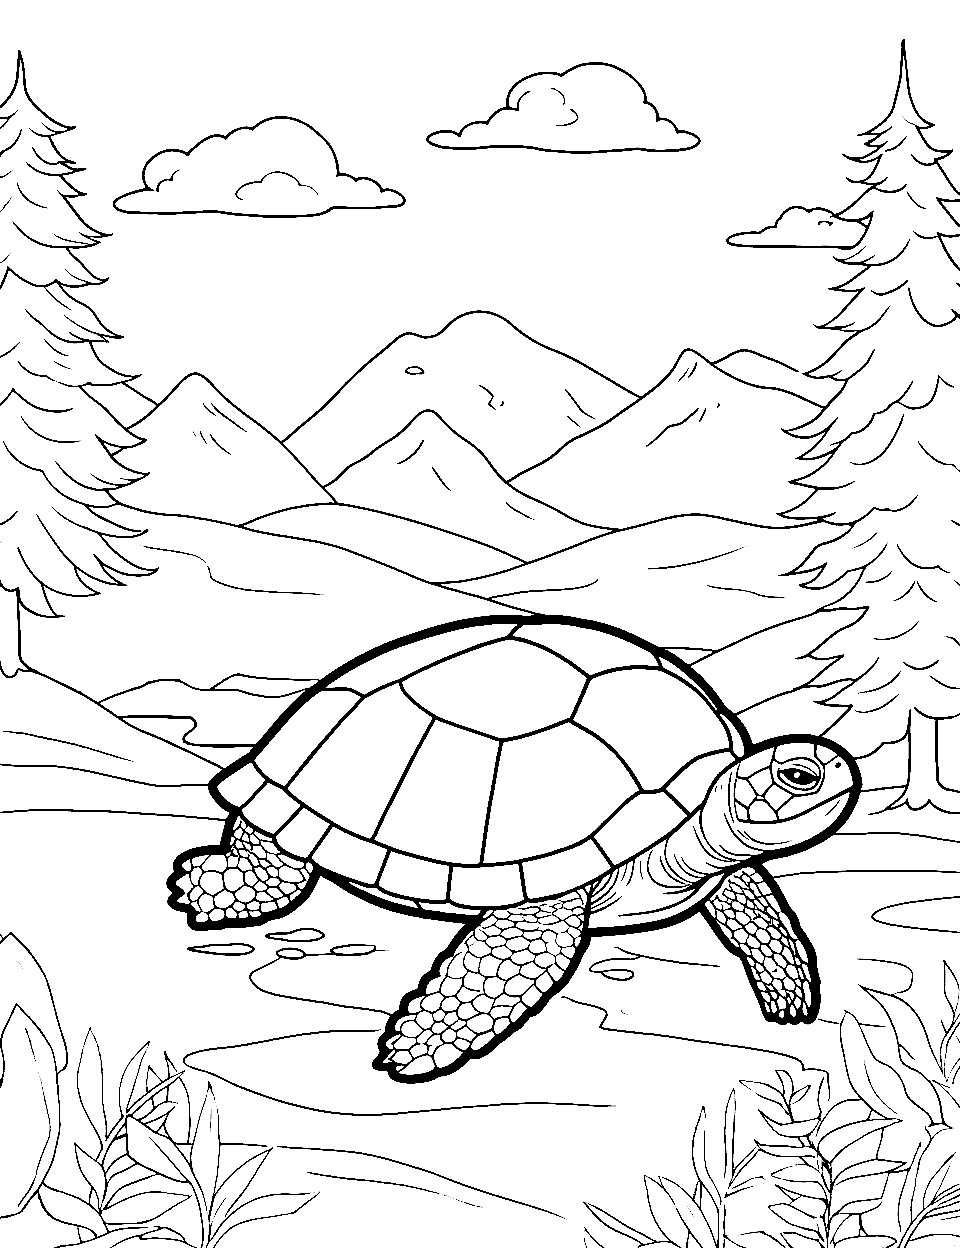 Turtle's Journey Turtle Coloring Page - A turtle journeying across a forest floor.